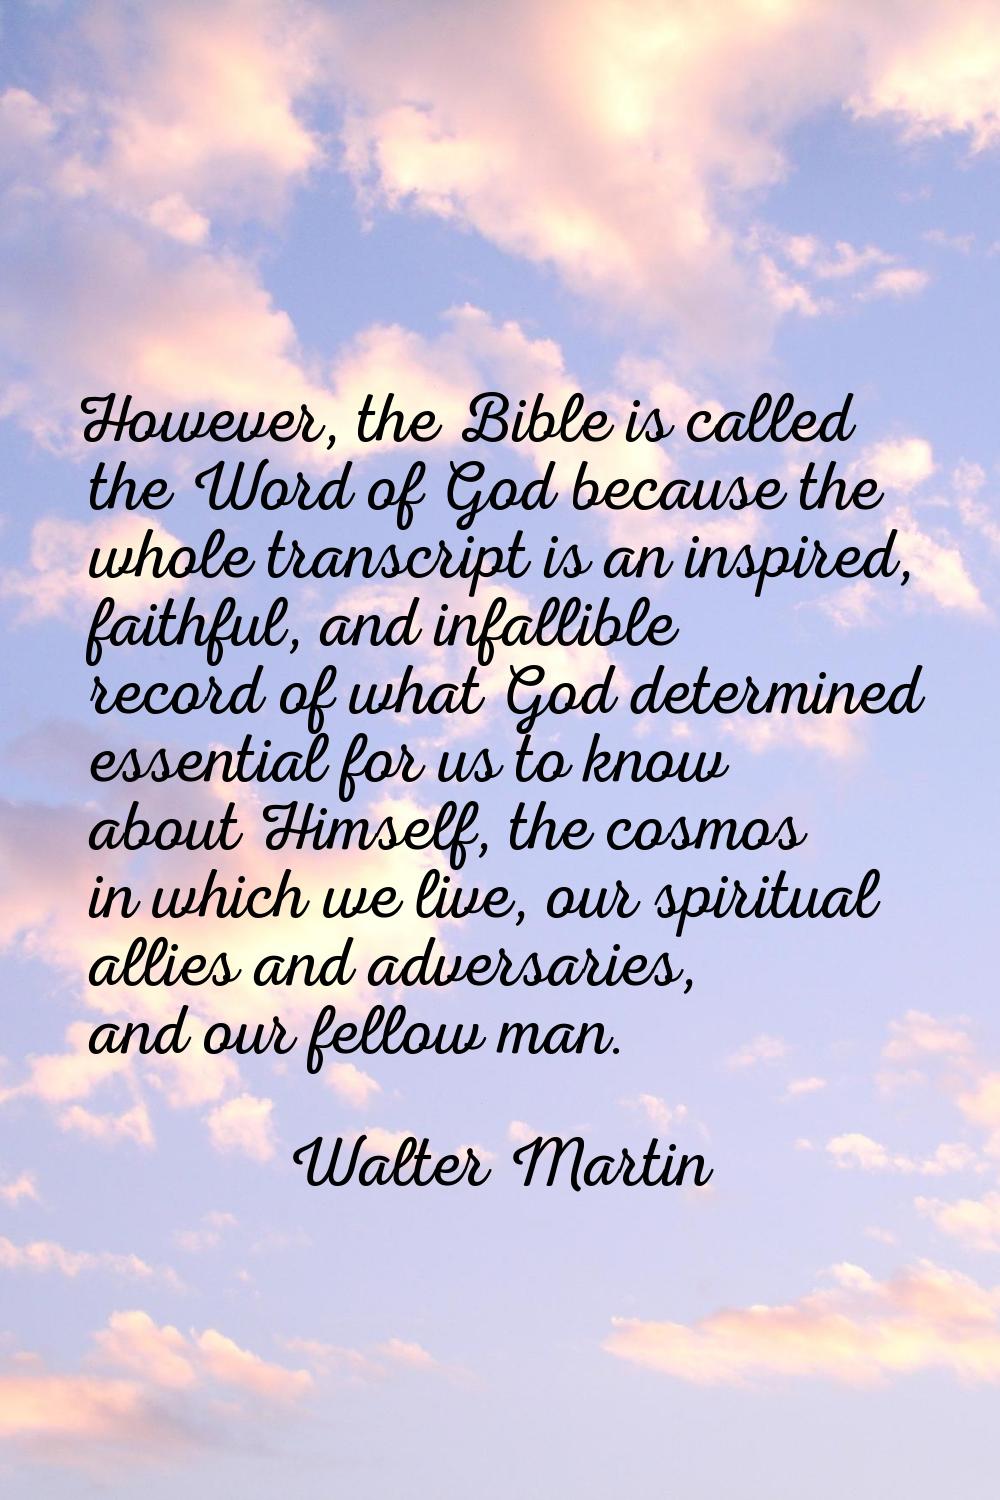 However, the Bible is called the Word of God because the whole transcript is an inspired, faithful,